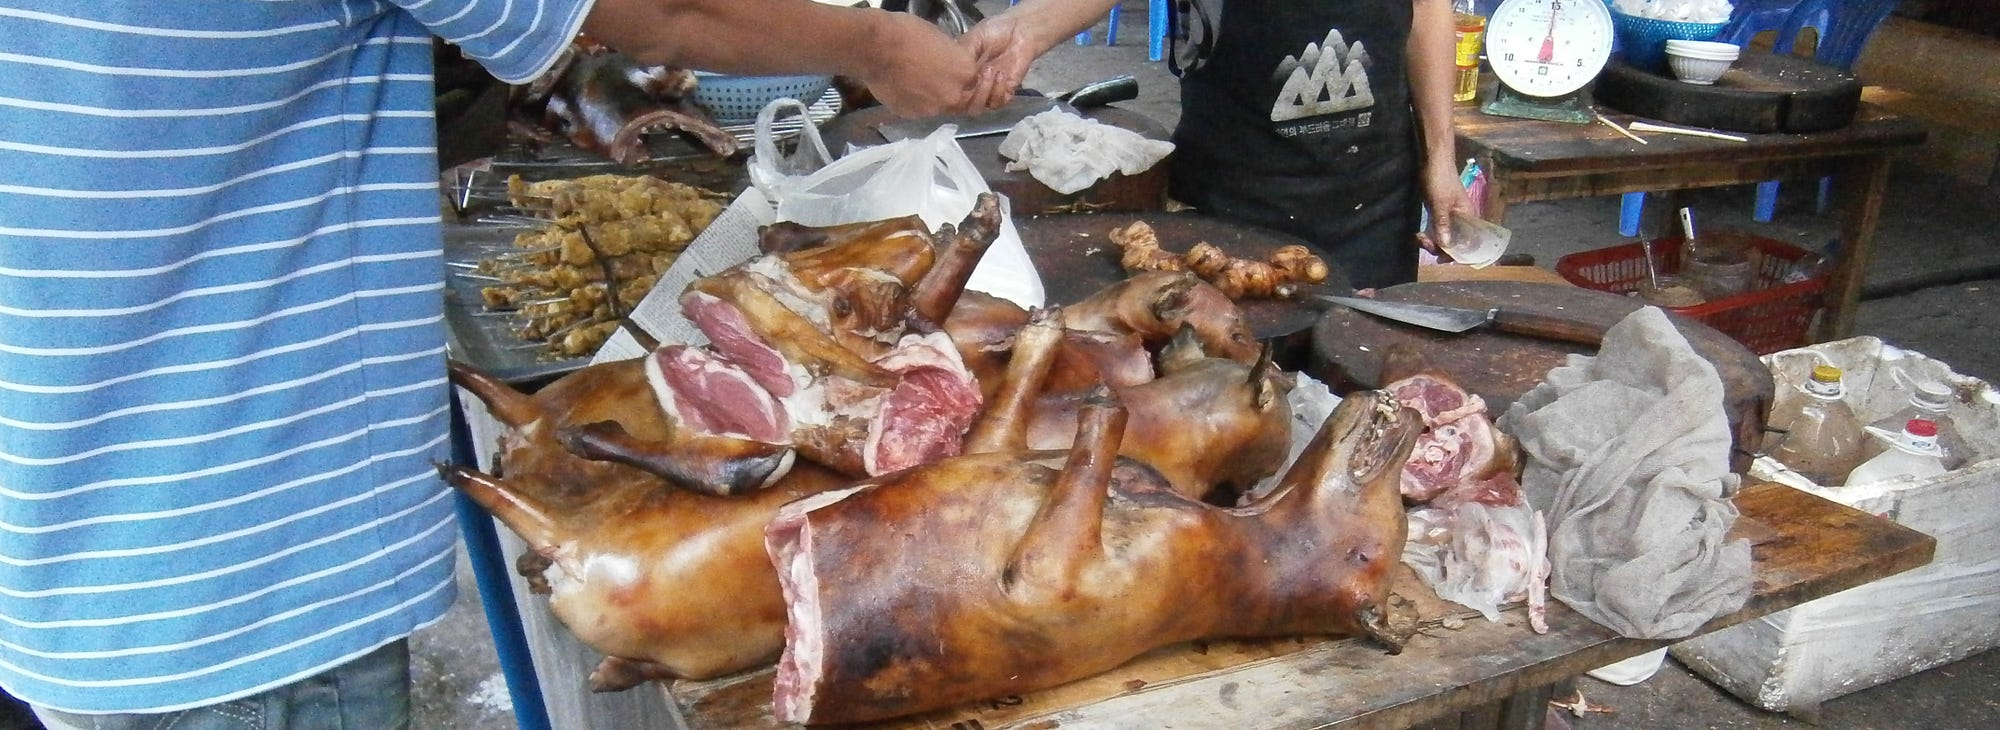 Deep Fried Dog and Bats Skinned Alive Should you put Your Ethics on